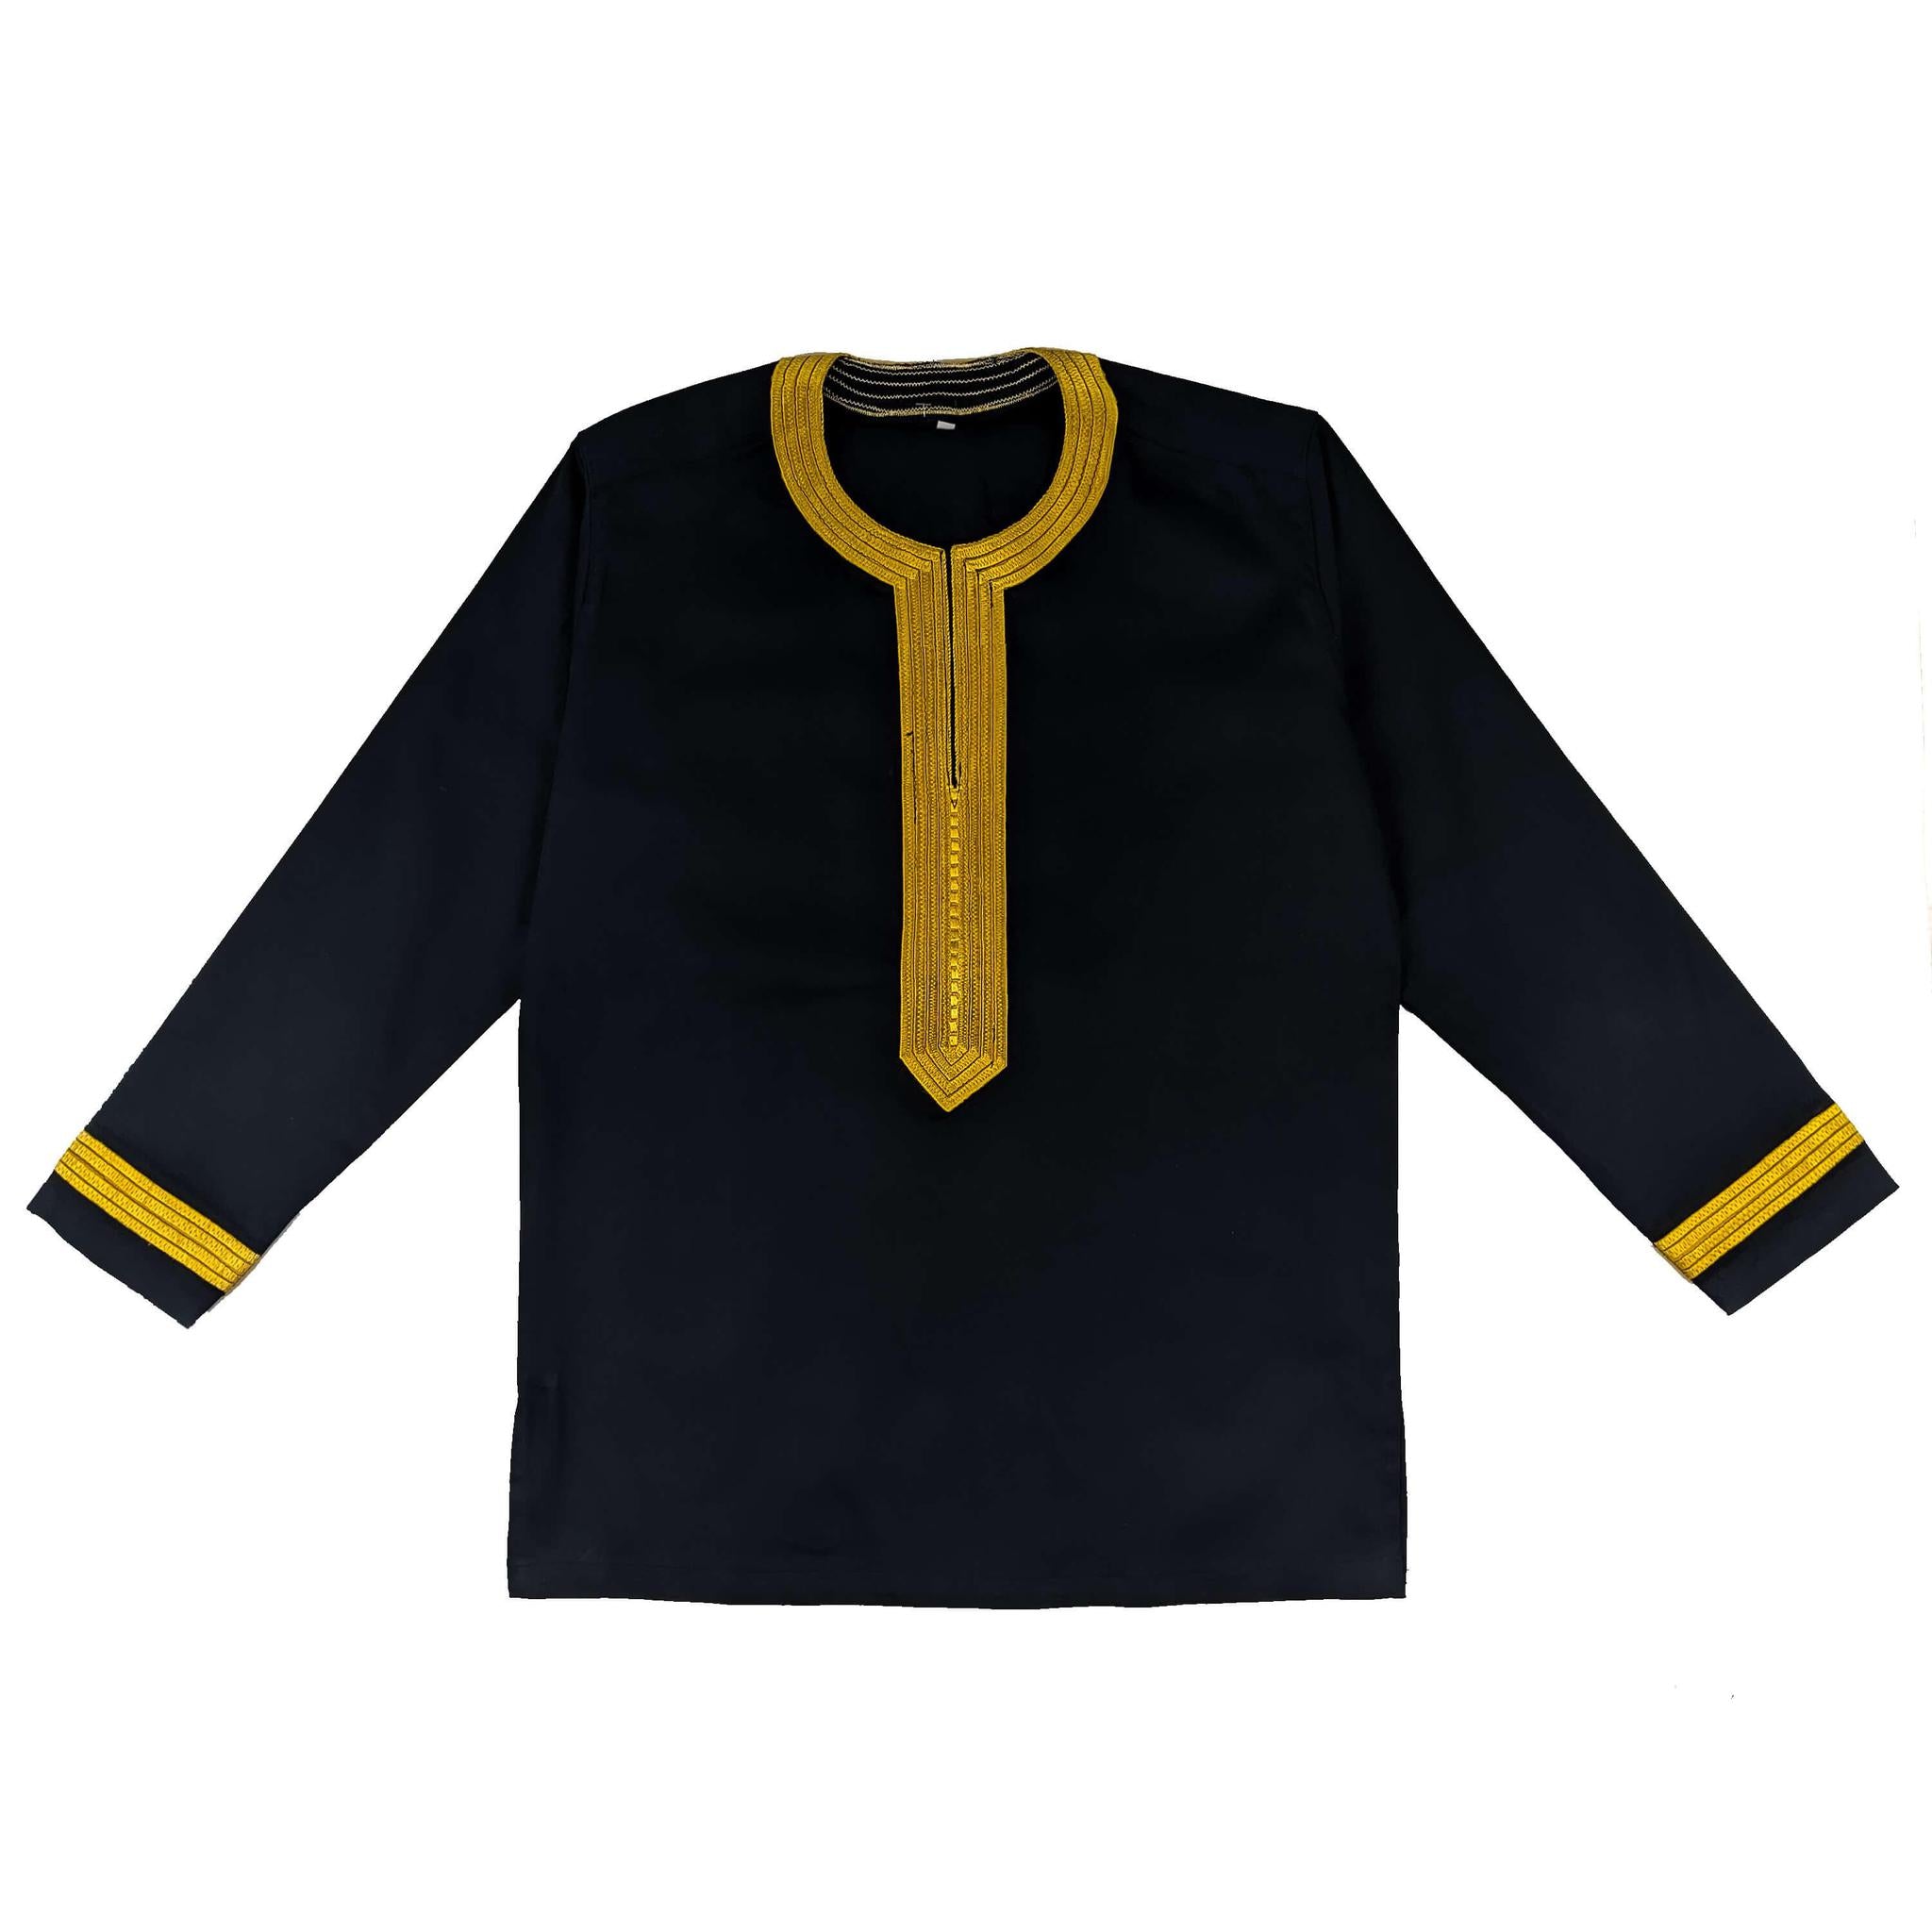 Men's Embroidery Long Sleeve Top